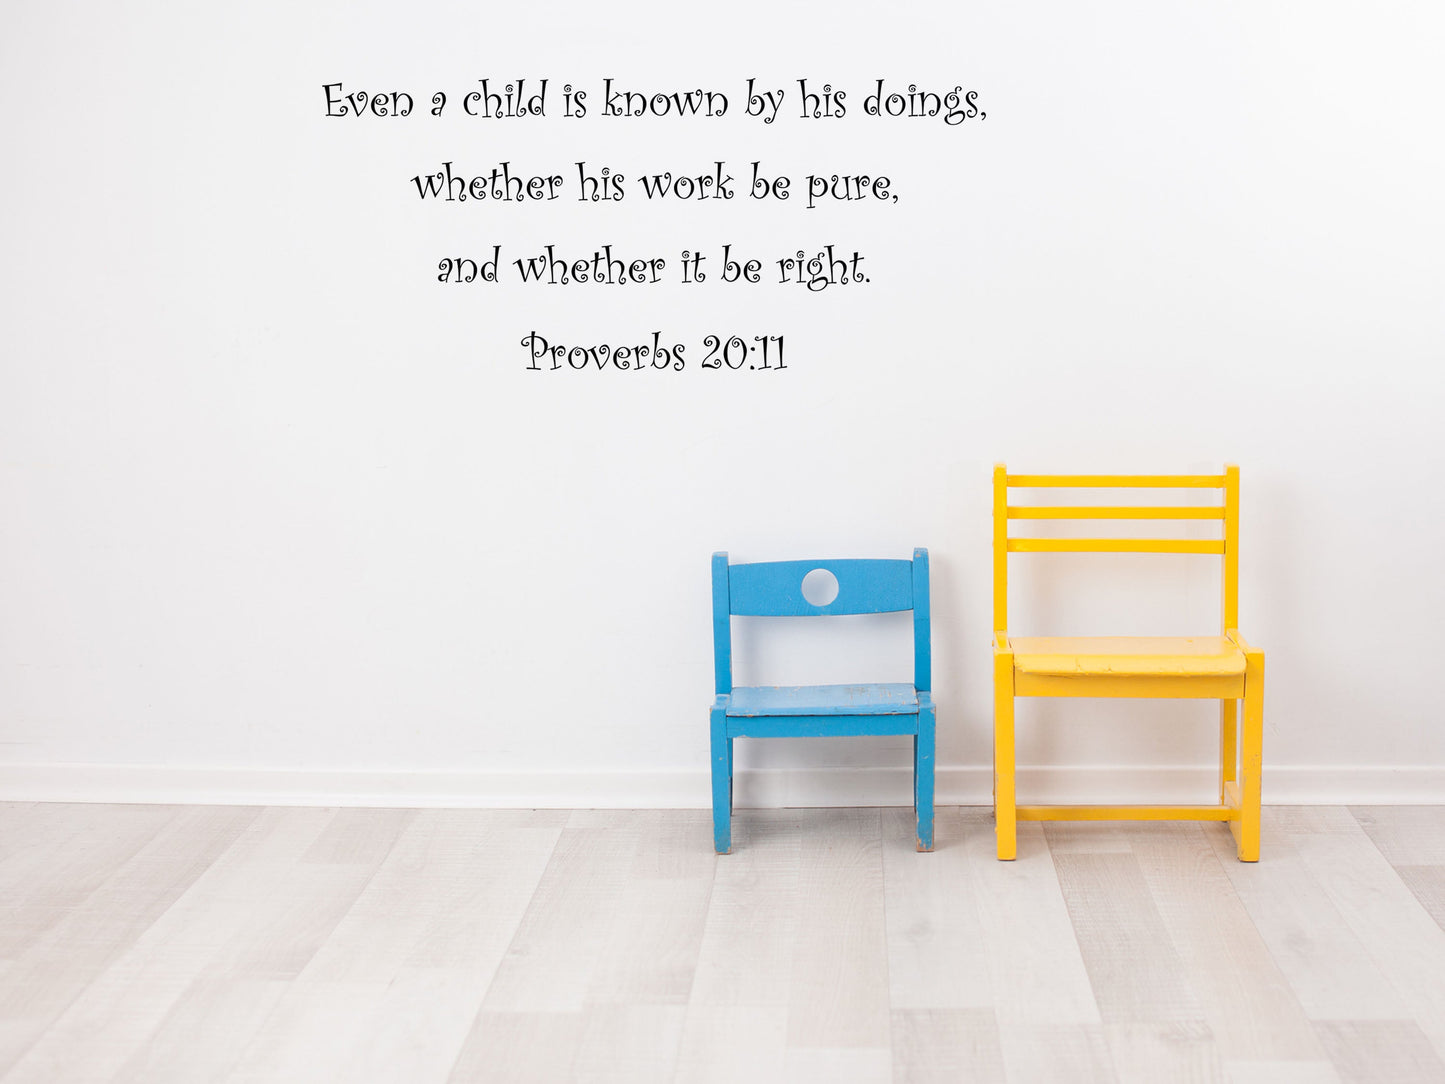 Every Child is Known By His Doings Proverbs 20:11 Words Wall Decal Vinyl Wall Decal Title Done 